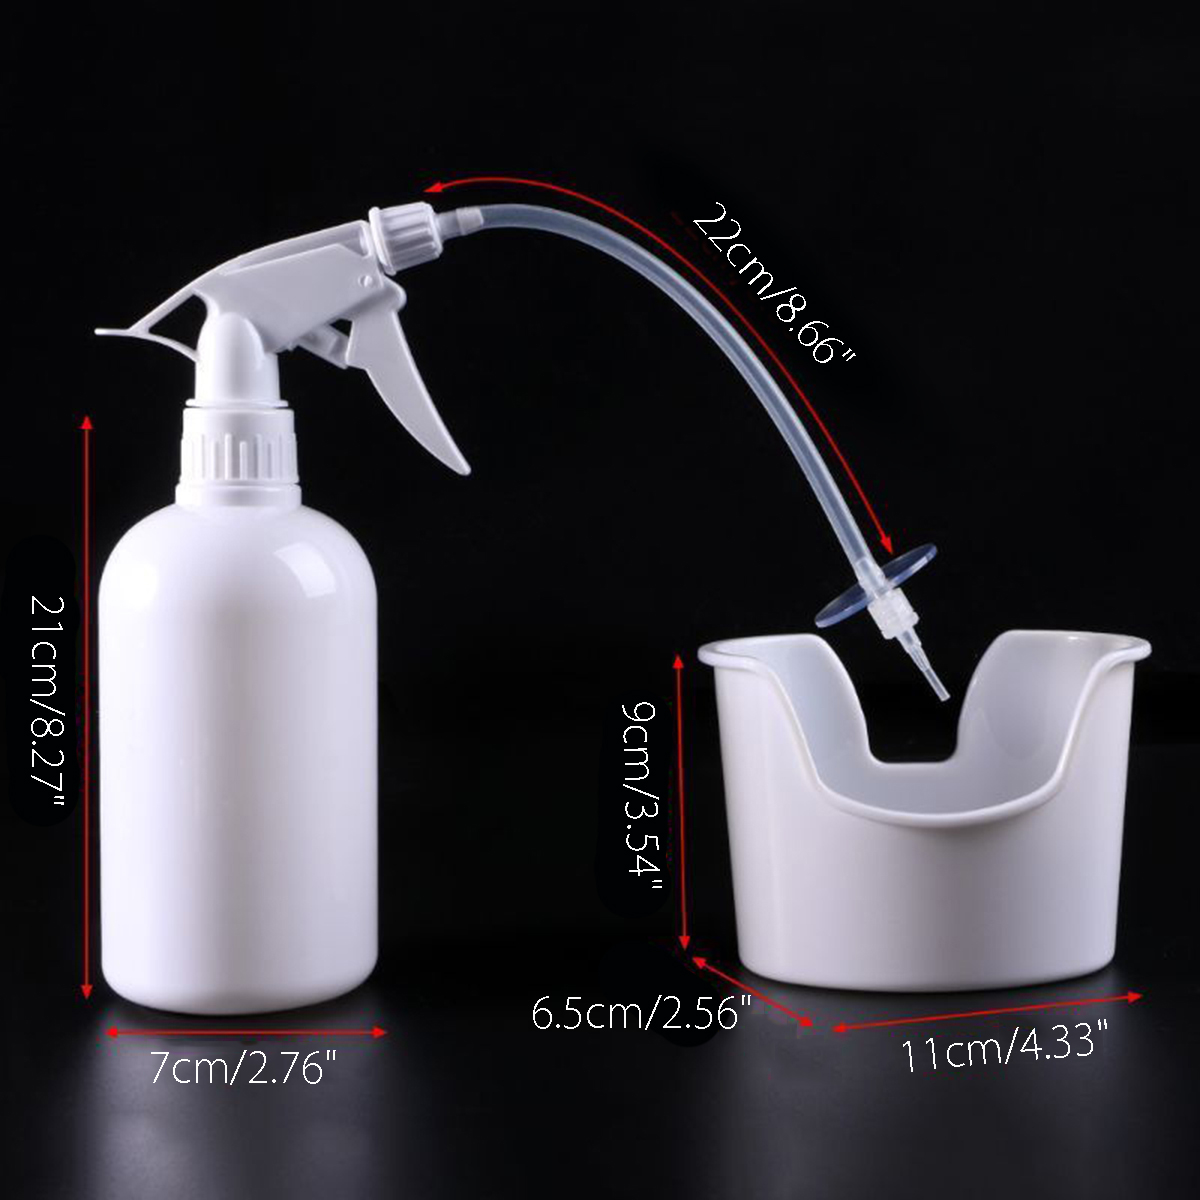 Ear-Wax-Removal-Kit-Ear-Irrigation-Ear-Washer-Bottles-System-For-Ear-Cleaning-Tools-Set--5-Tips-1406121-8